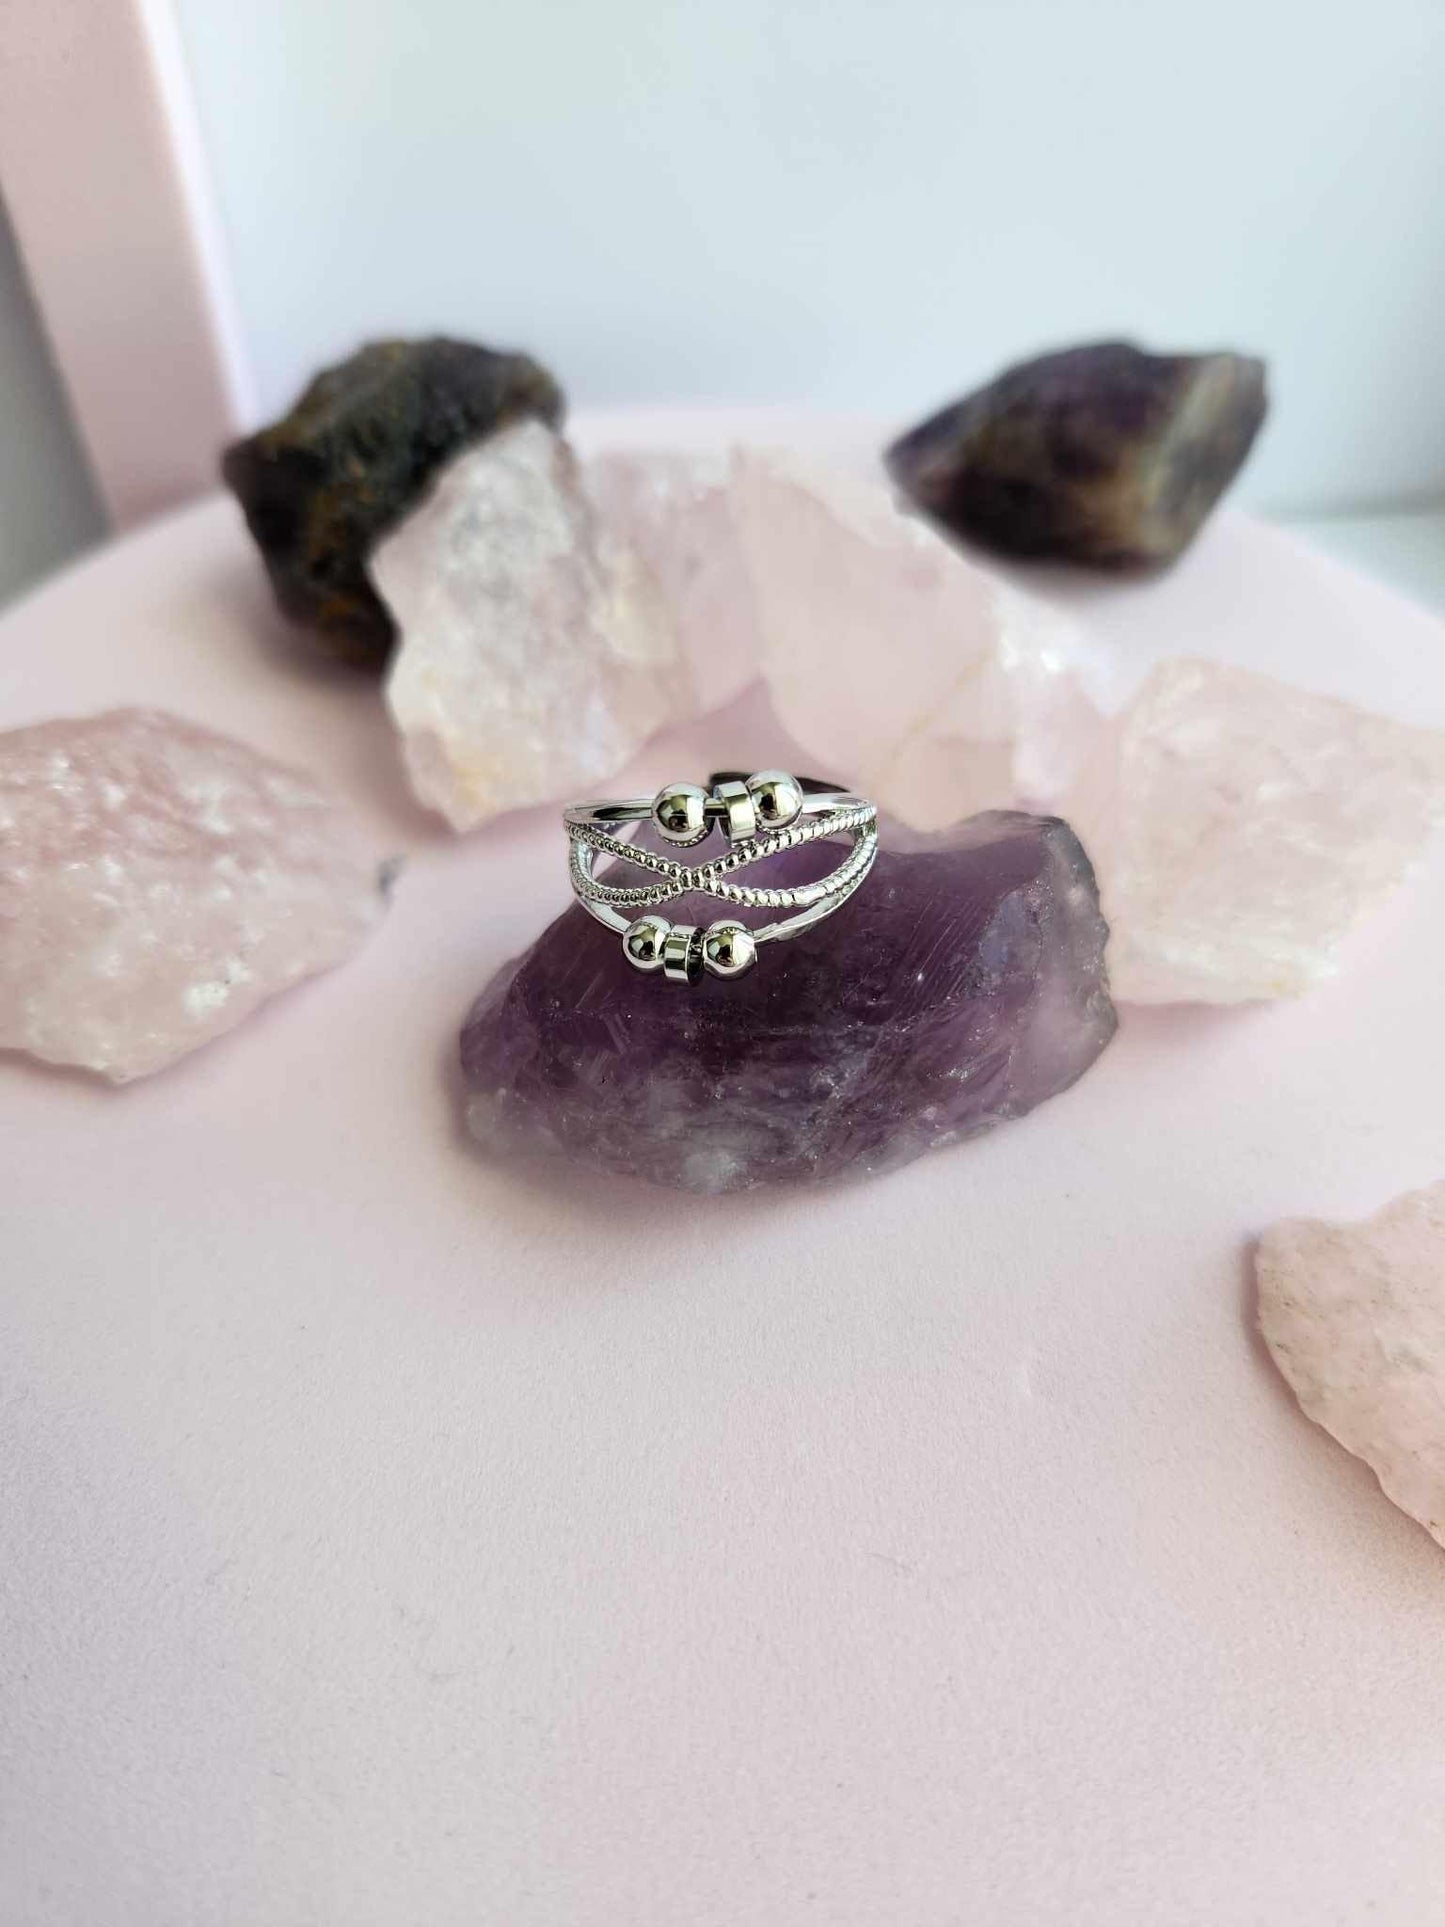 The Mind-Body Collection - Silver Fidget Spinner Ring